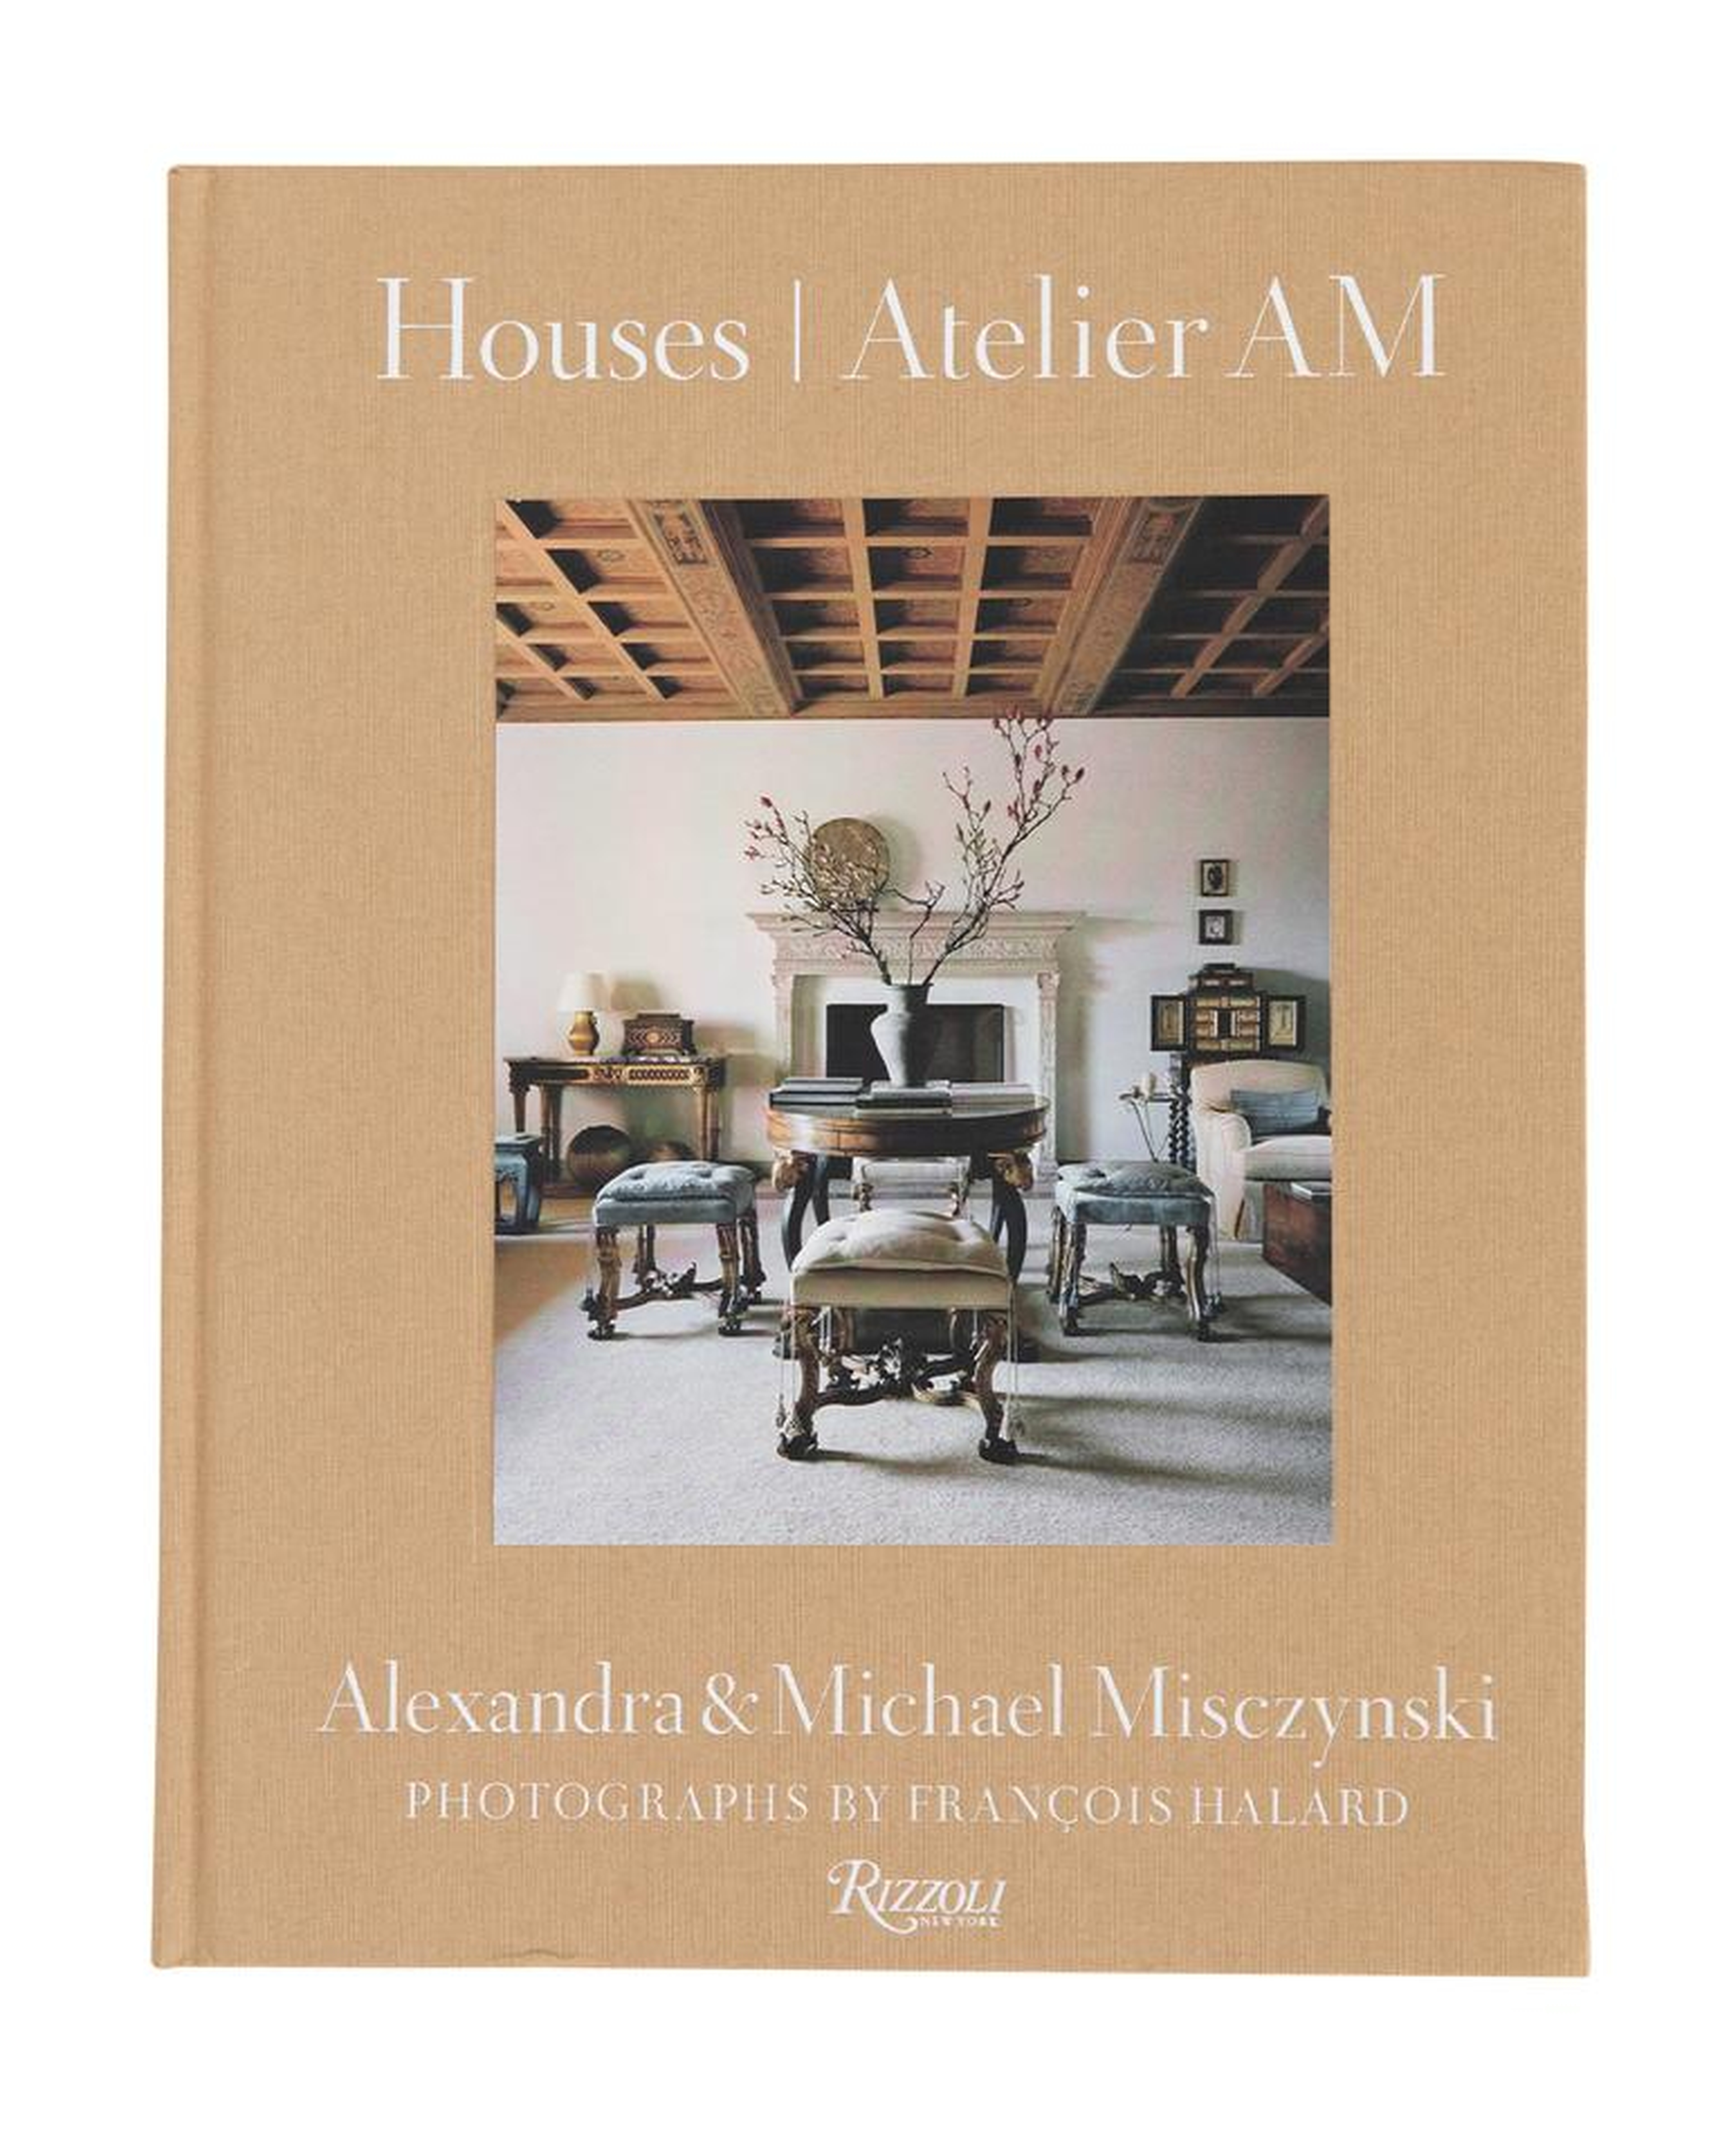 Houses: Atelier AM - McGee & Co.